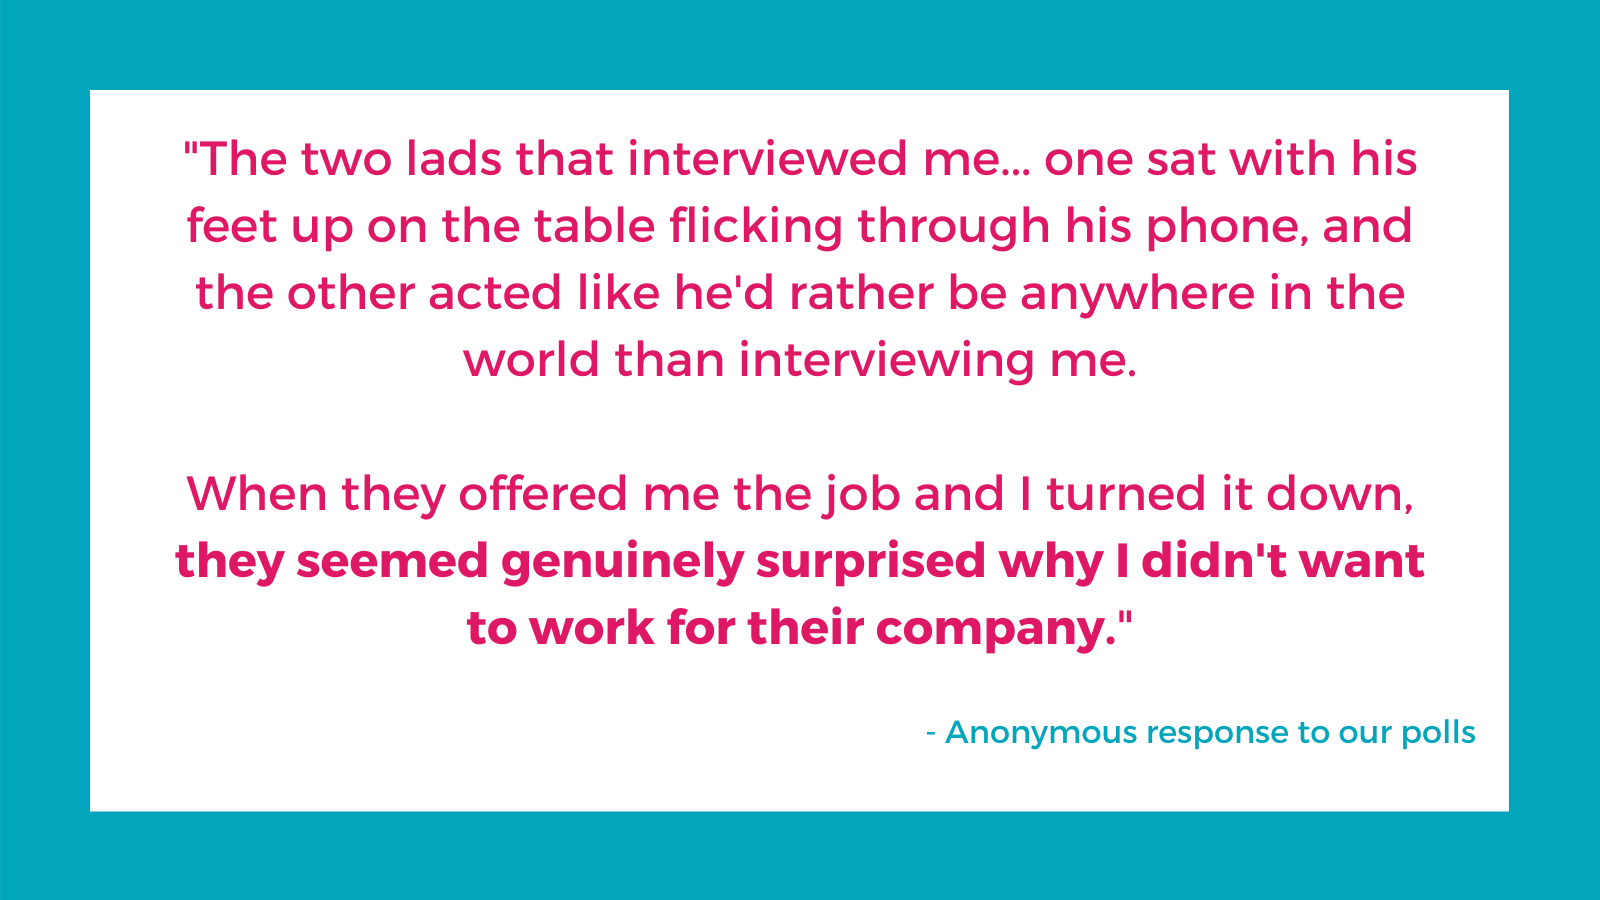 Quote from a respondent about a negative interview experience